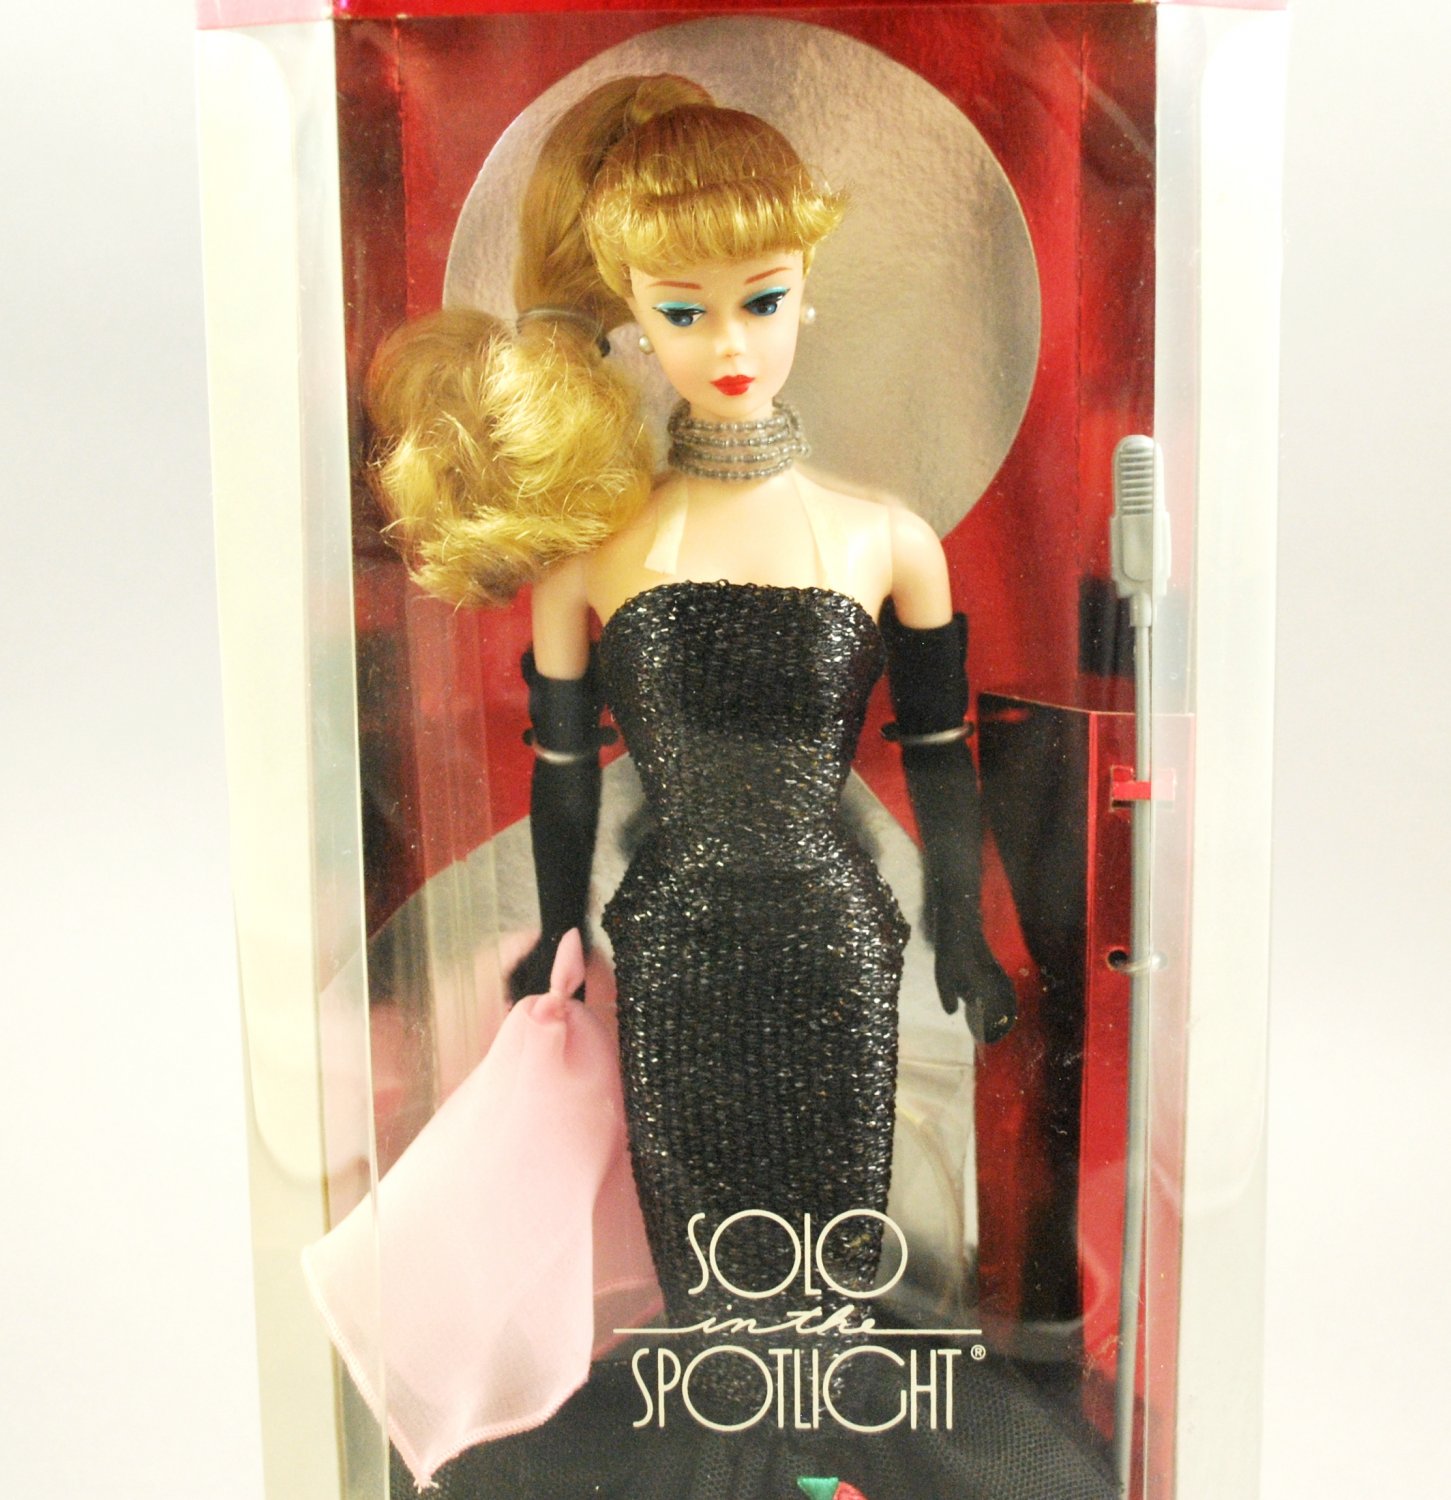 1994 Barbie Solo in the Spotlight Doll Special Edition